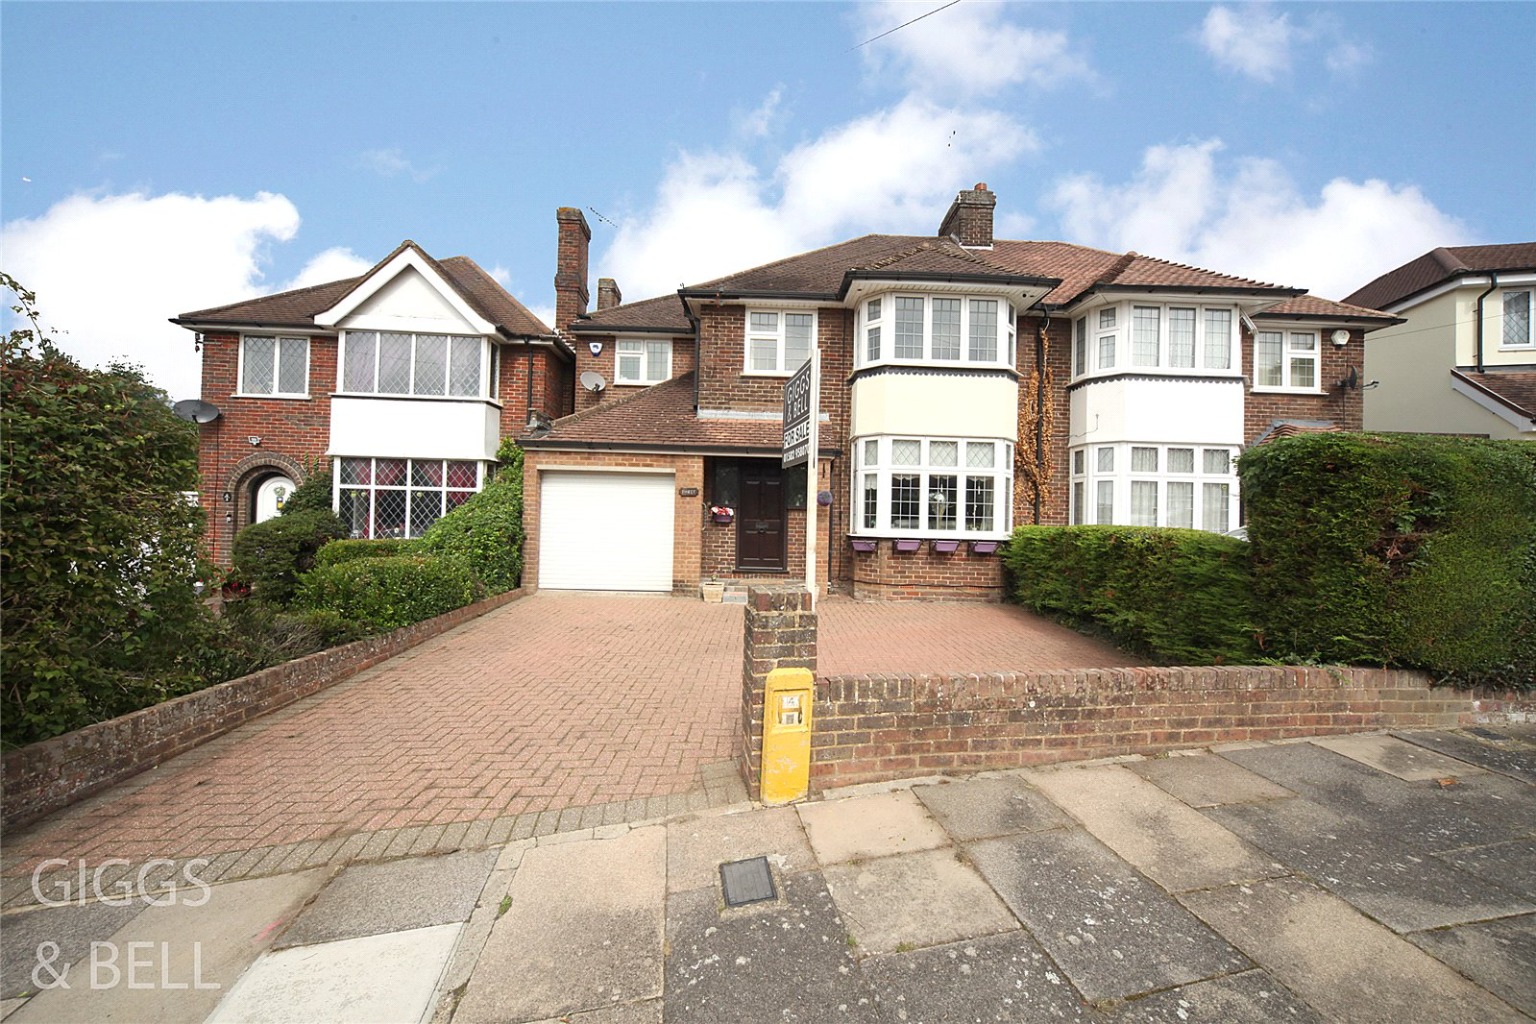 4 bed semi-detached house for sale in Knoll Rise, Luton, LU2 